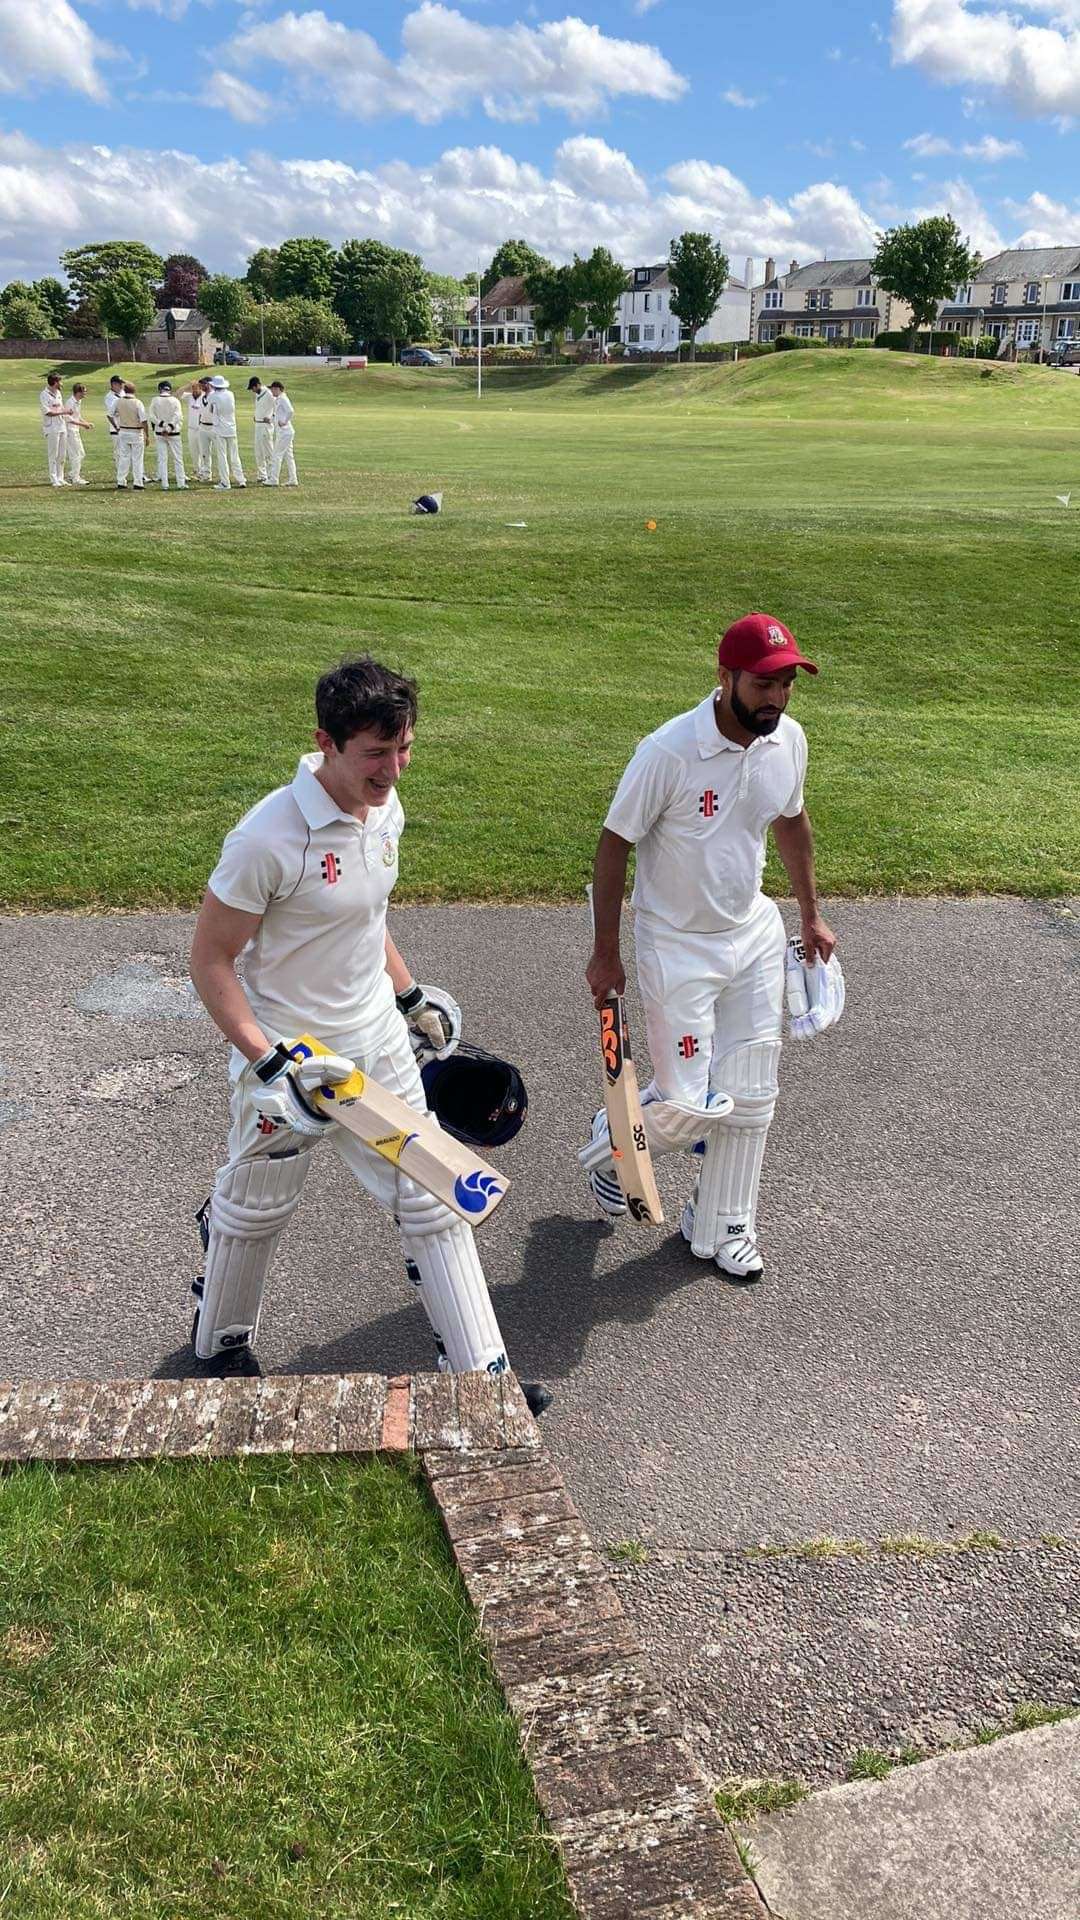 Magnus McGhee (17) walks off the field with captain Pal Dhami after a fine batting display.